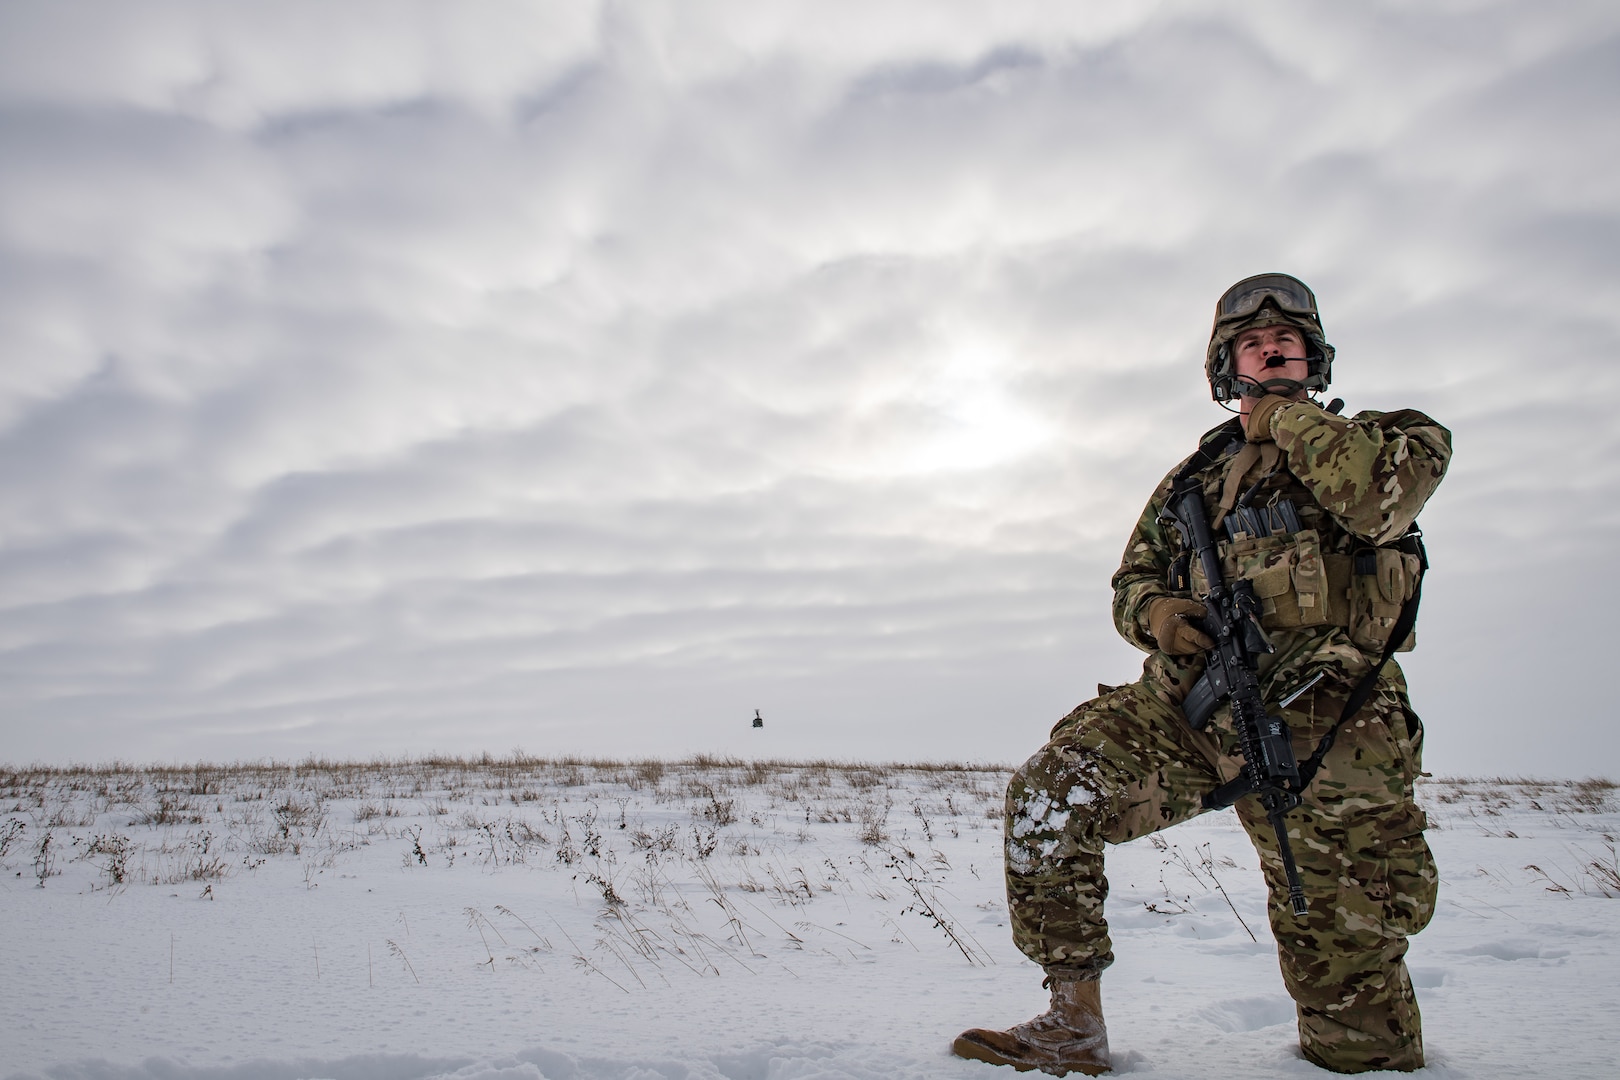 Senior Airman, response force leader with 791st Missile Security Forces Squadron, performs security sweep of landing zone near Minot Air Force Base, North Dakota, on January 25, 2017 (U.S. Air Force/Brandon Shapiro)